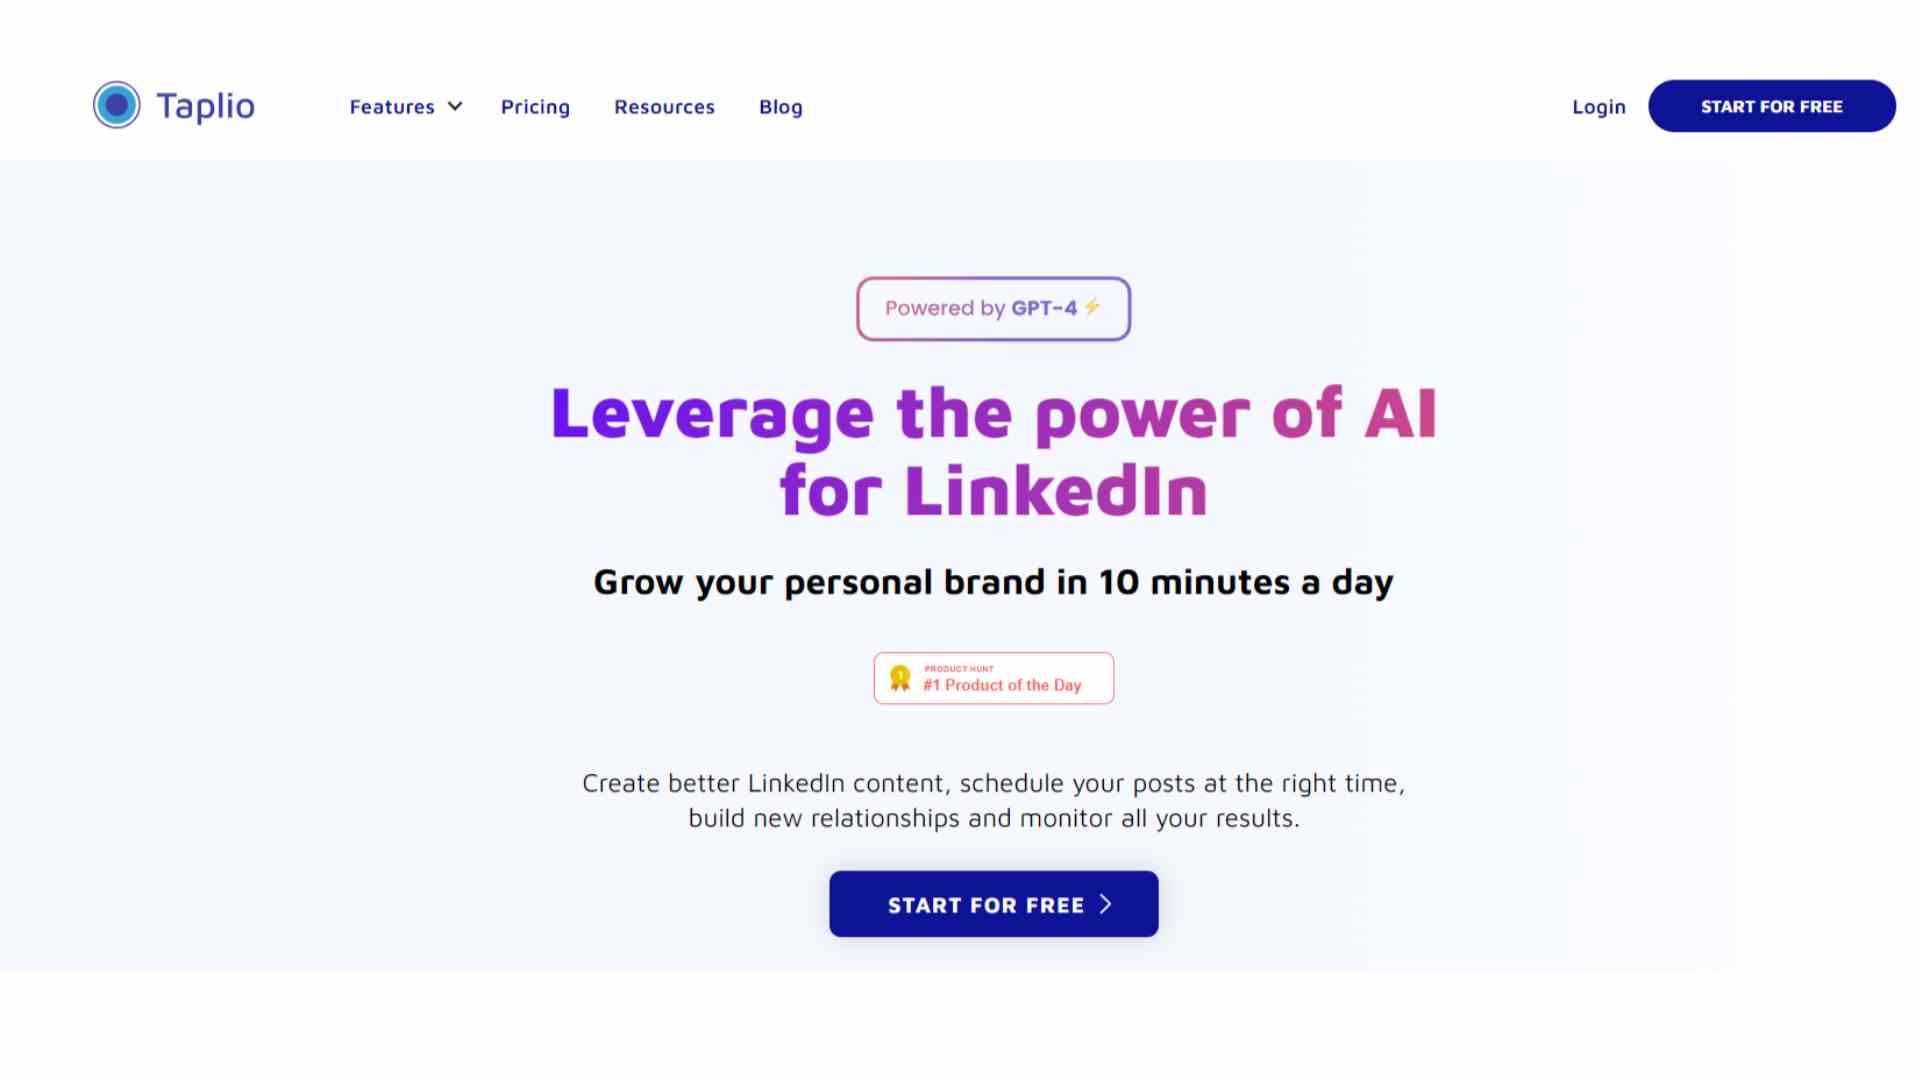 Taplio: The All-in-One LinkedIn Solution for Personal Branding and Business Growth